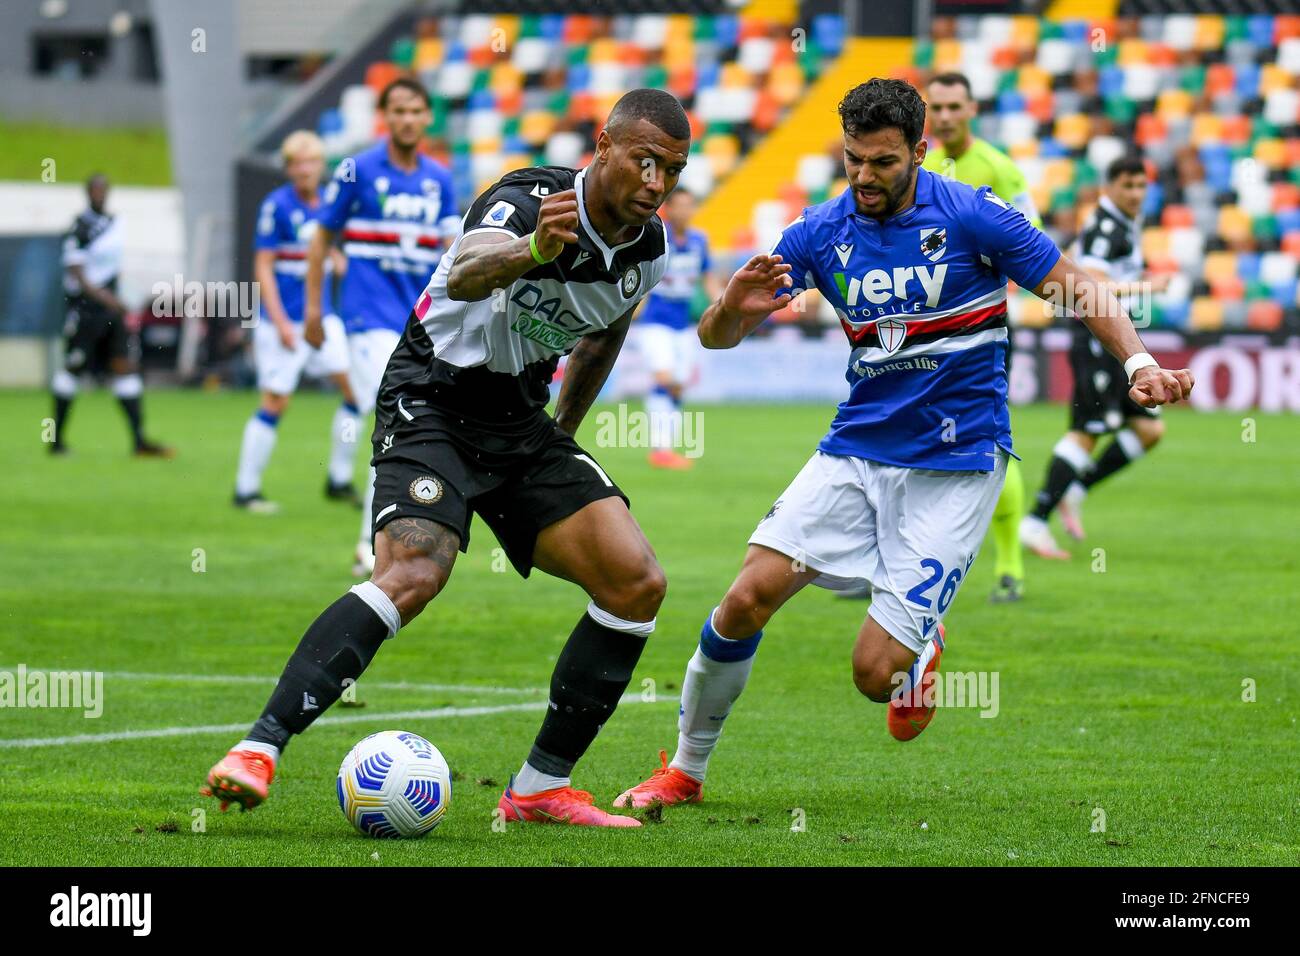 Udine, Italy. 16th May, 2021. Silva Souza Walace (Udinese) in action against Mehdi Leris (Sampdoria) during Udinese Calcio vs UC Sampdoria, Italian football Serie A match in Udine, Italy, May 16 2021 Credit: Independent Photo Agency/Alamy Live News Stock Photo